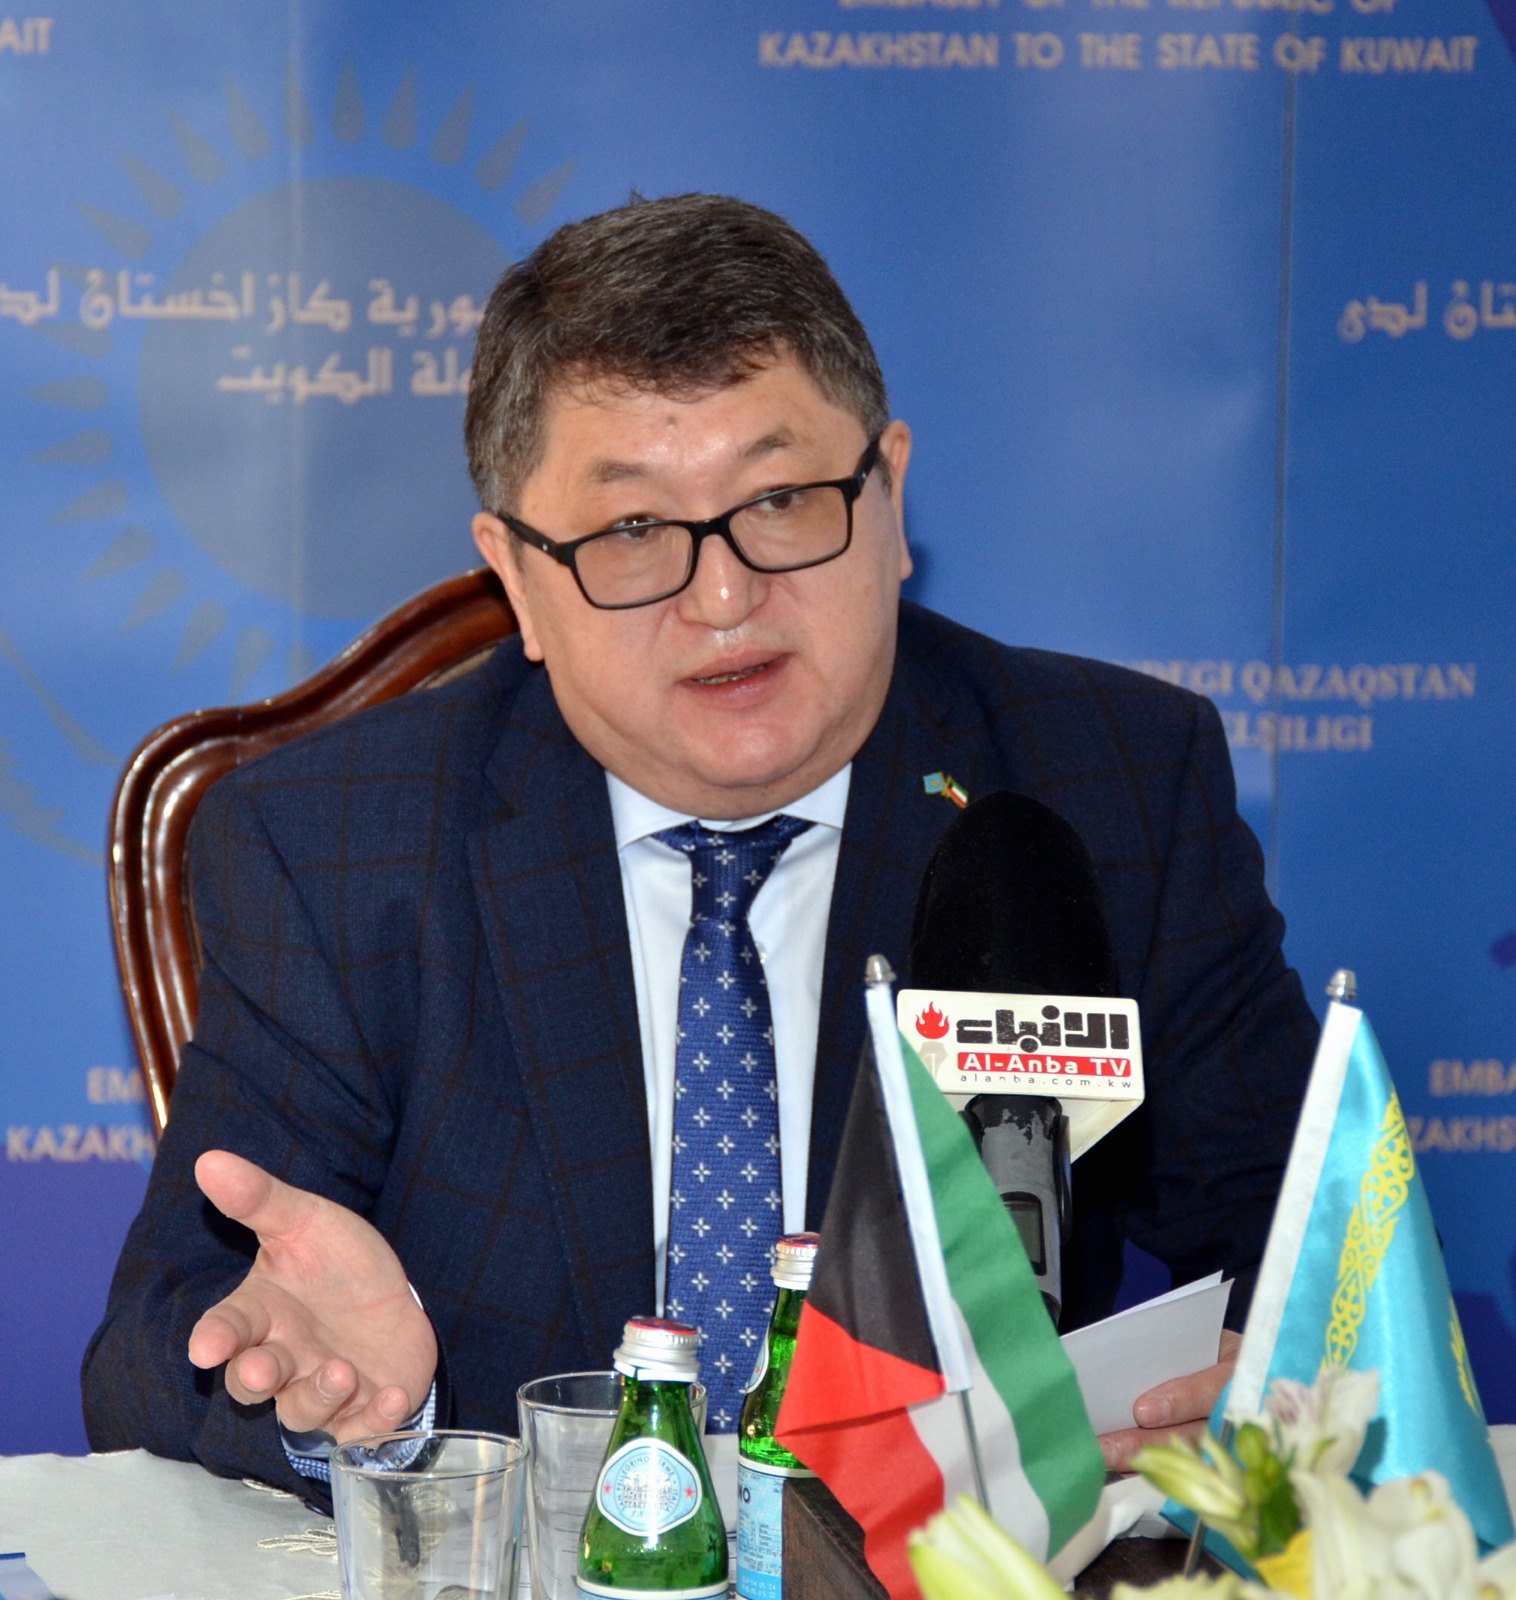 А briefing for media representatives of the State of Kuwait on the programs of political, economic and social reforms of the President of the Republic of Kazakhstan H.E. Mr. Kassym-Jomart Tokayev